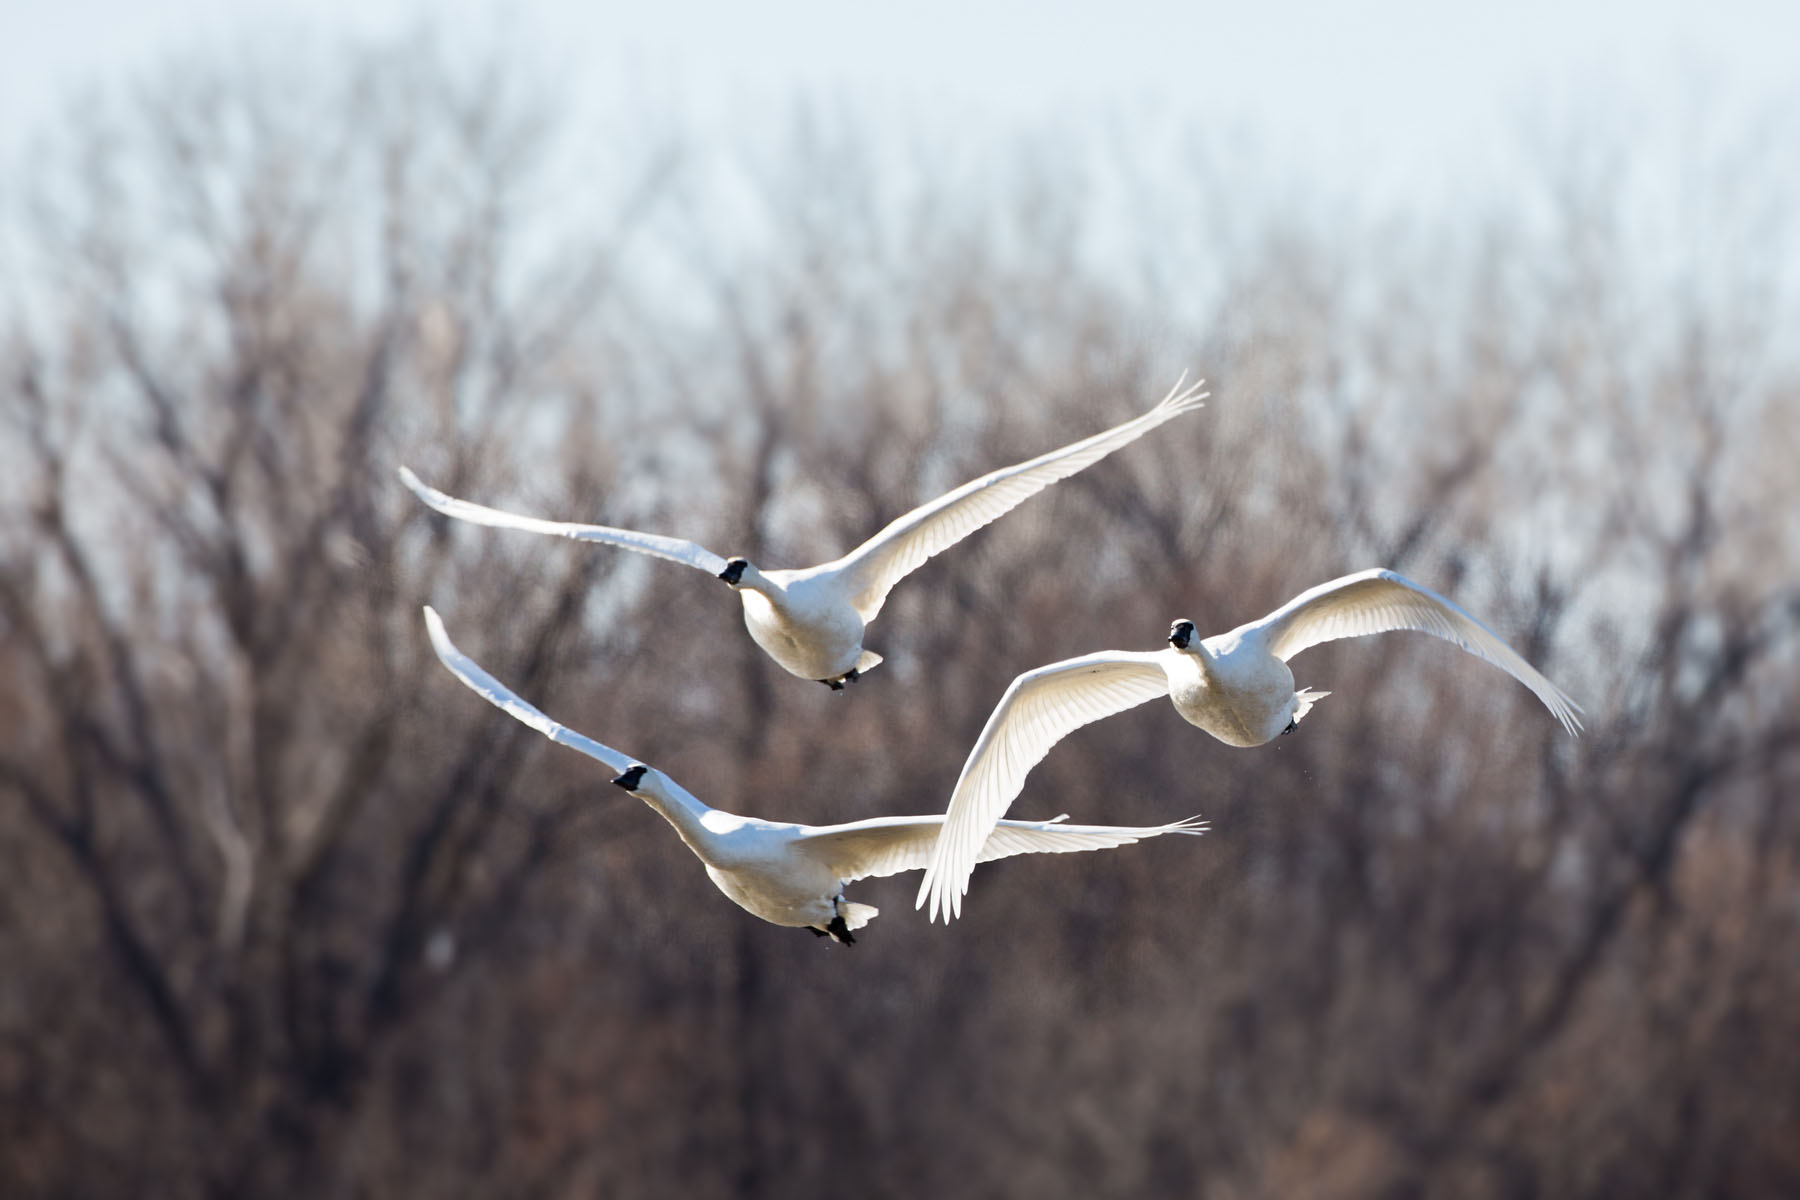 Trumpeter swans, Loess Bluffs NWR, December 2019.  Click for next photo.